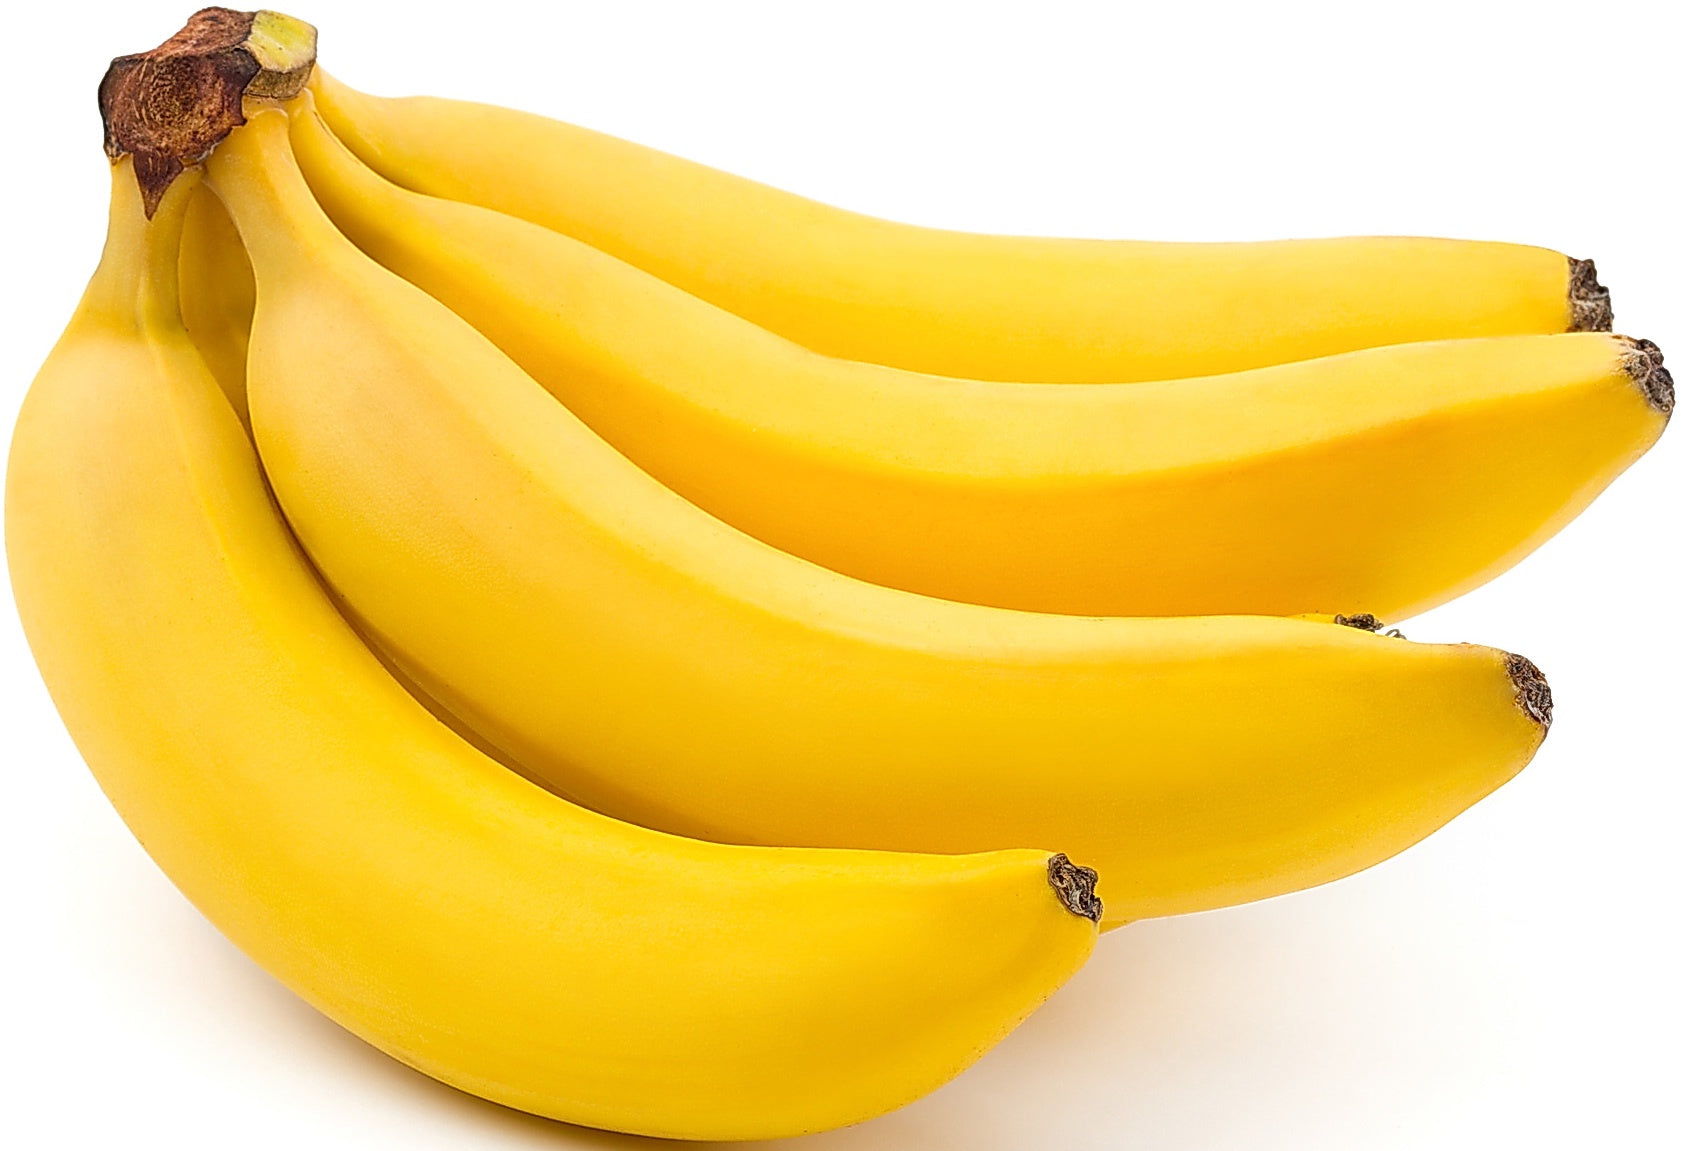 Online only - Bananas - Cavendish - Each